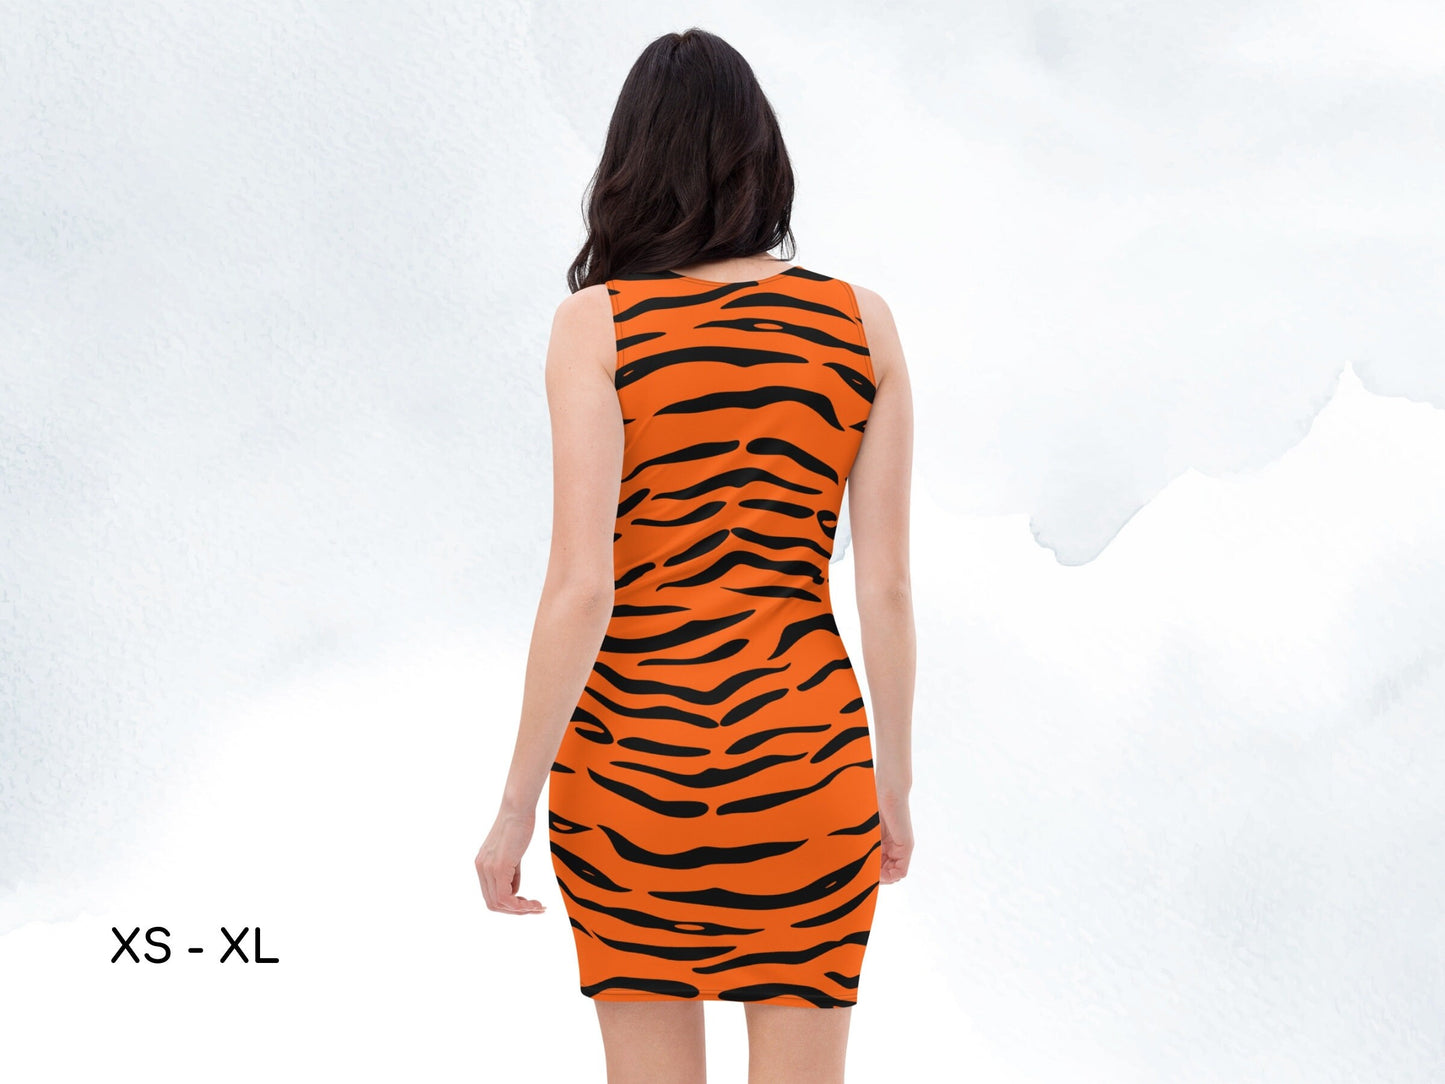 Winnie the Pooh Tigger Inspired Bodycon Dress, Alice in Wonderland, Adult Halloween Costume, Cosplay Dress, Sexy Dress, Gift for Her